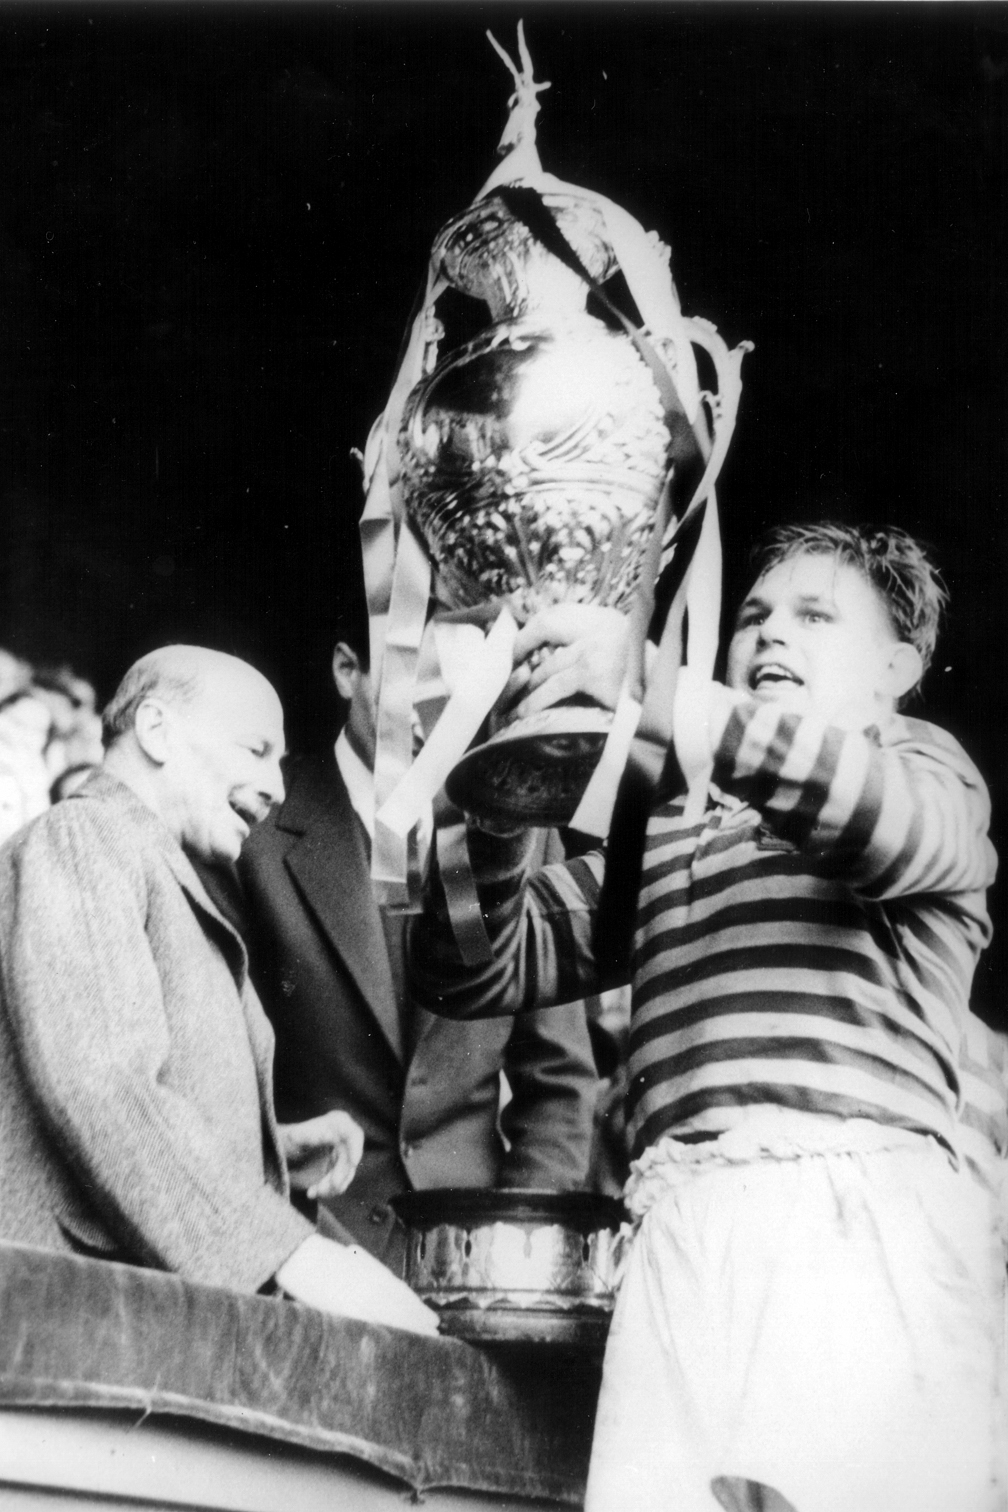 Harry Bath lifts the Challenge Cup in 1950